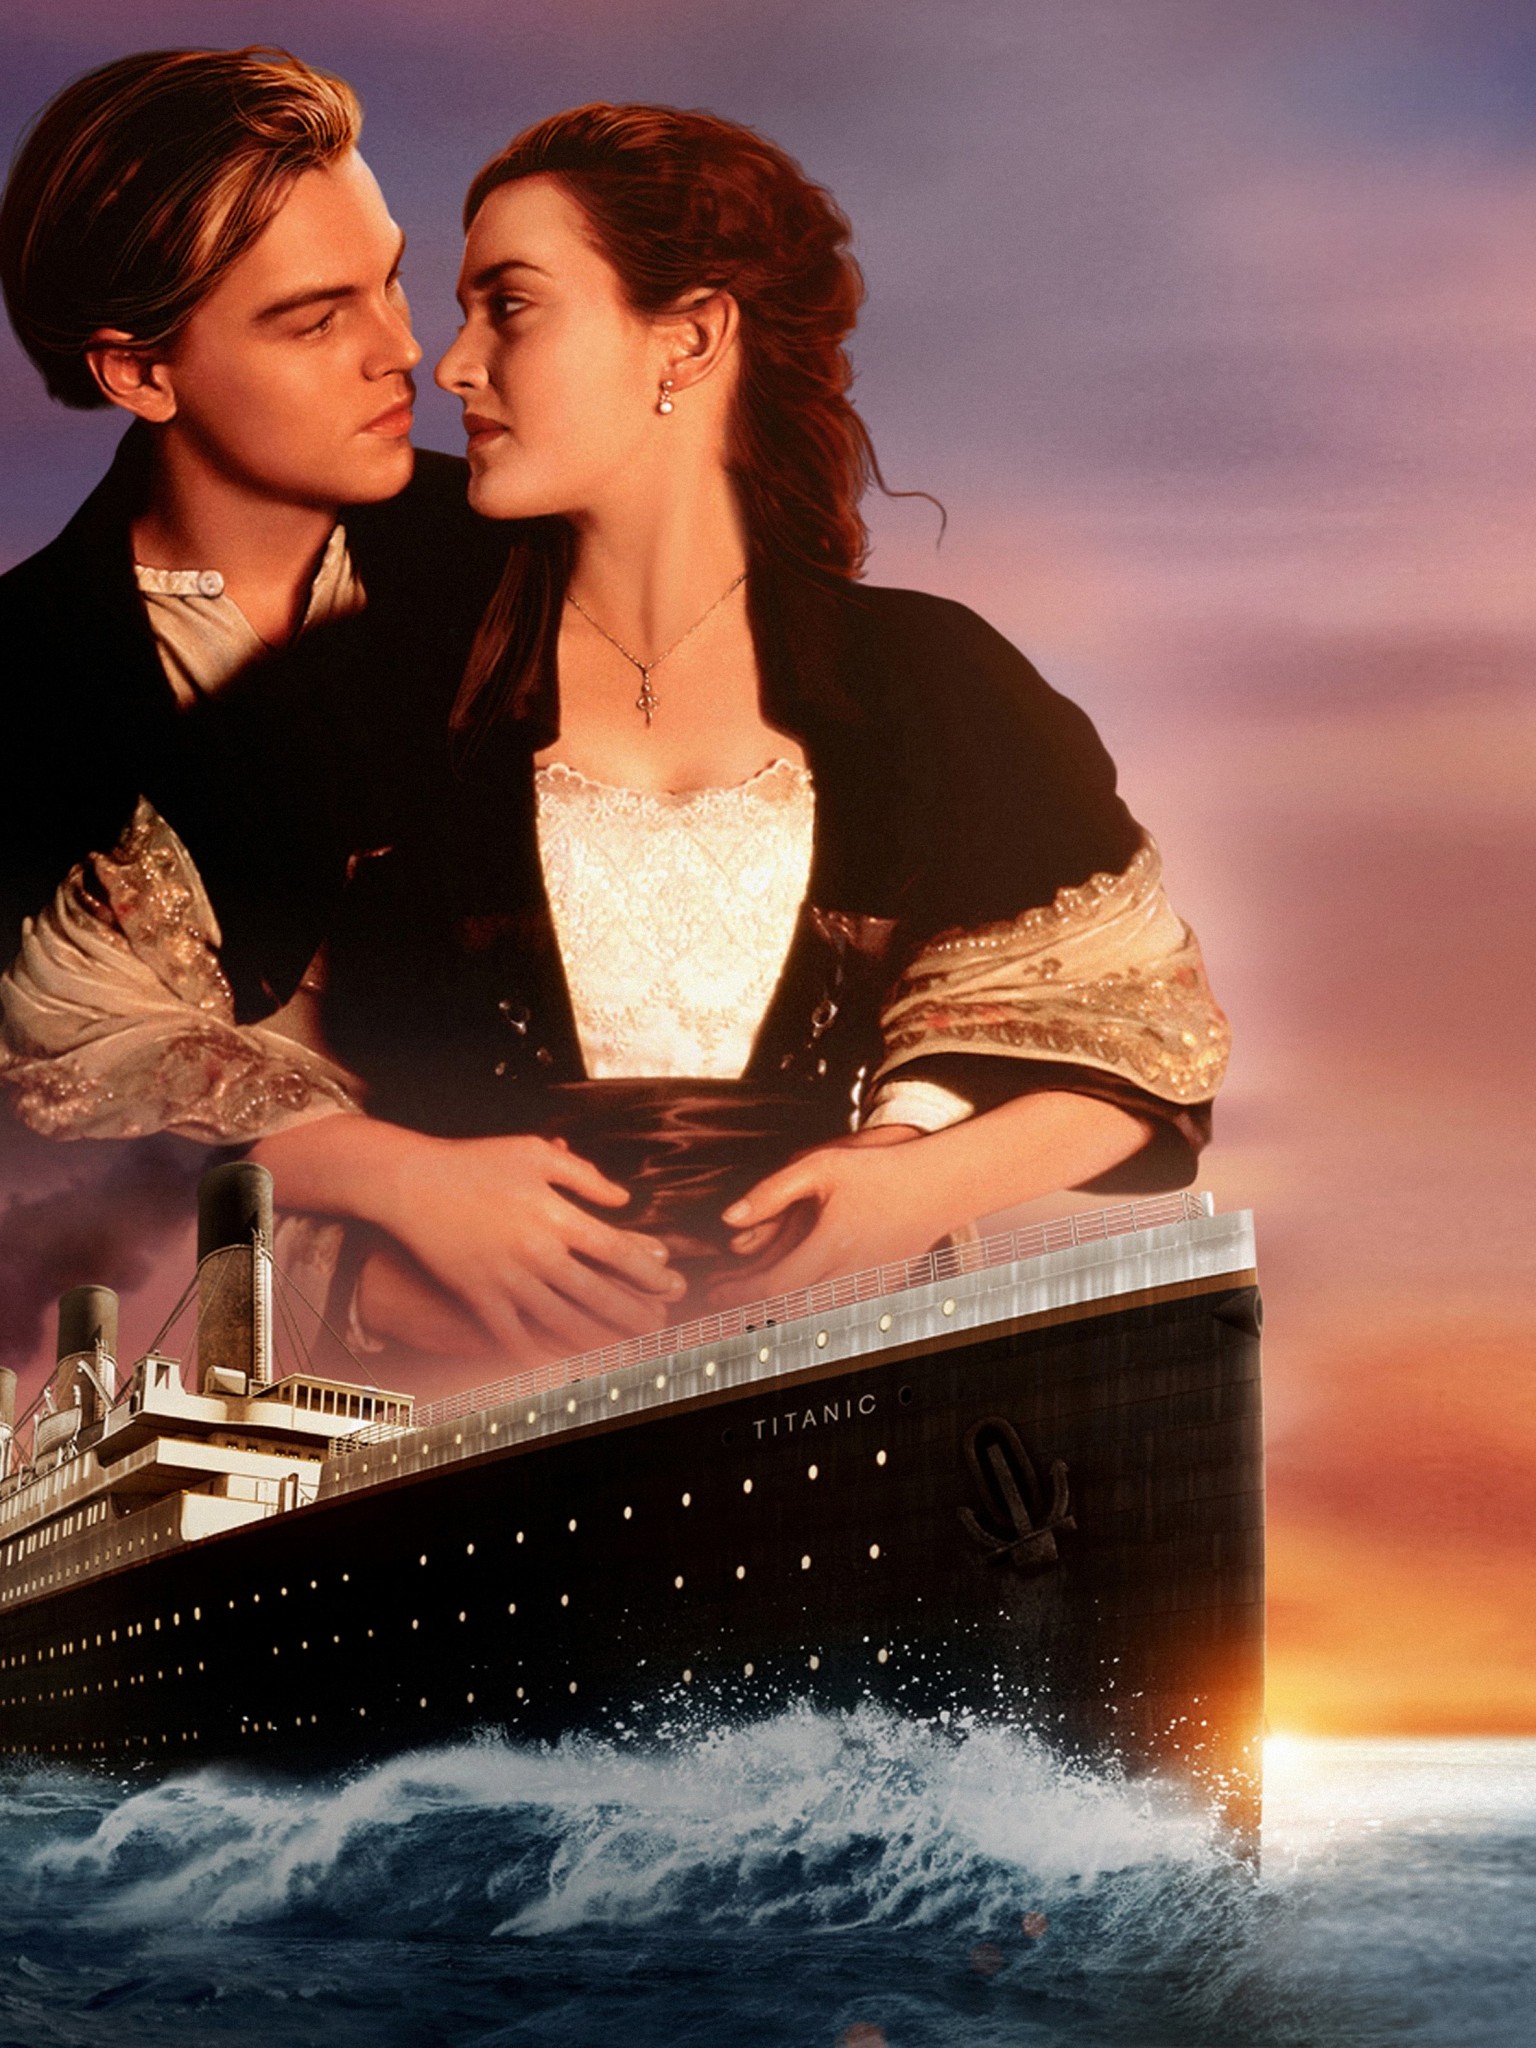 Titanic Movie Poster Hd , HD Wallpaper & Backgrounds